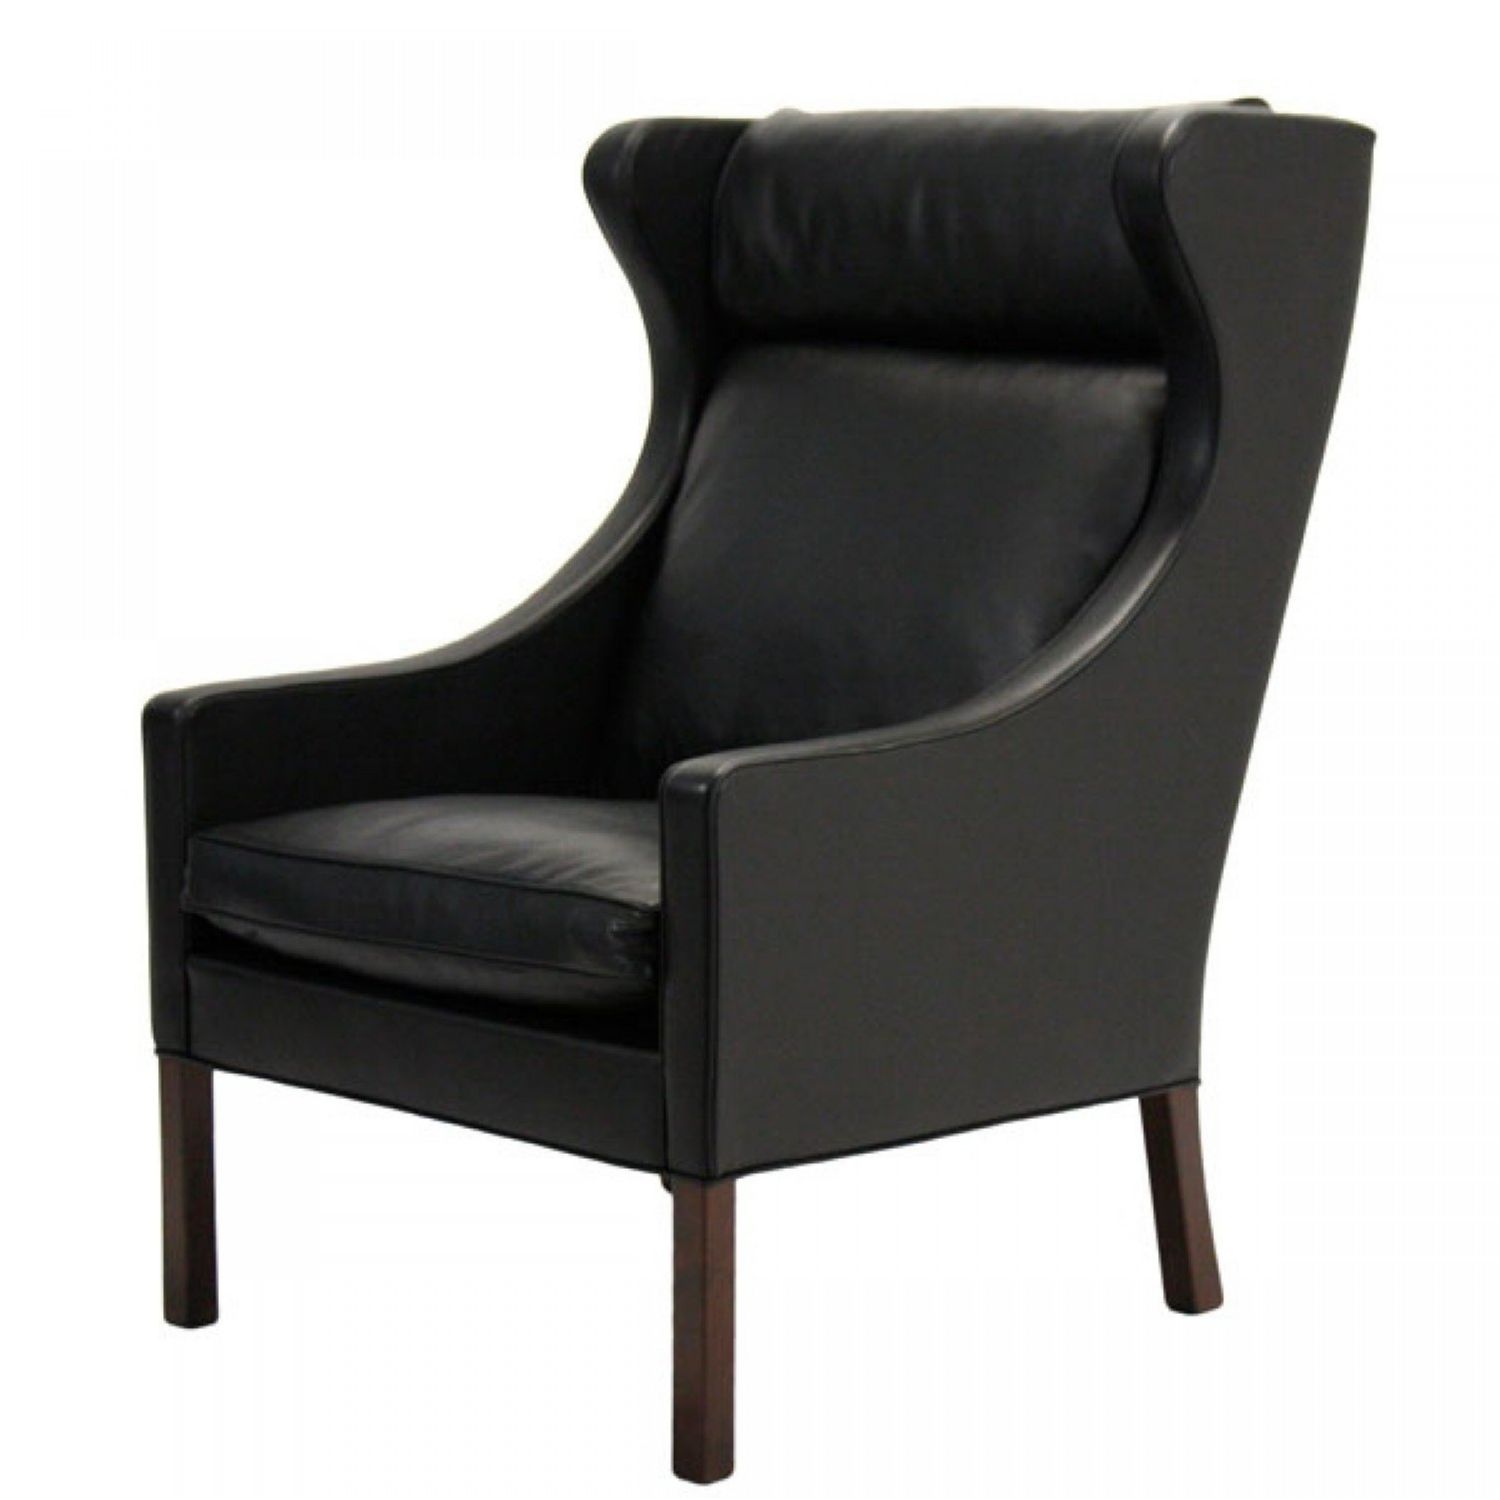 BM 2204 - Reupholstered lounge chair